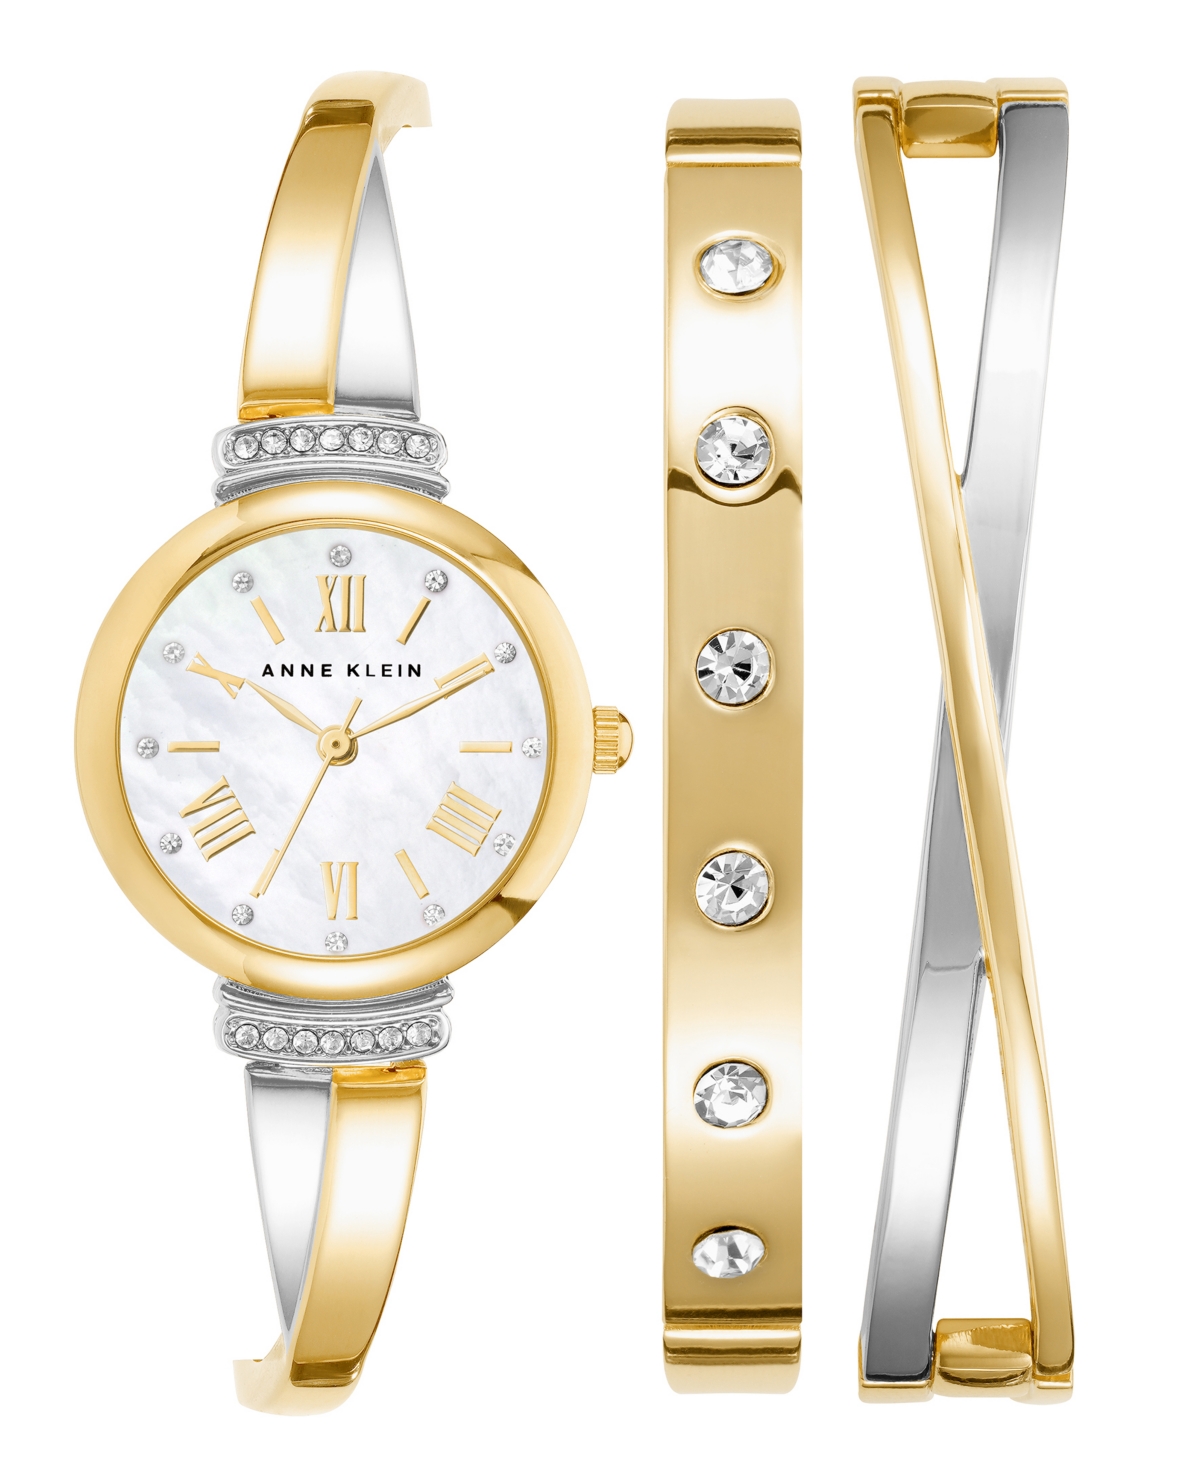 Anne Klein Women's Gold-tone And Silver-tone Alloy Bangle With Crystal Accents Fashion Watch 33mm Set 3 Pieces In Gold-tone,silver-tone